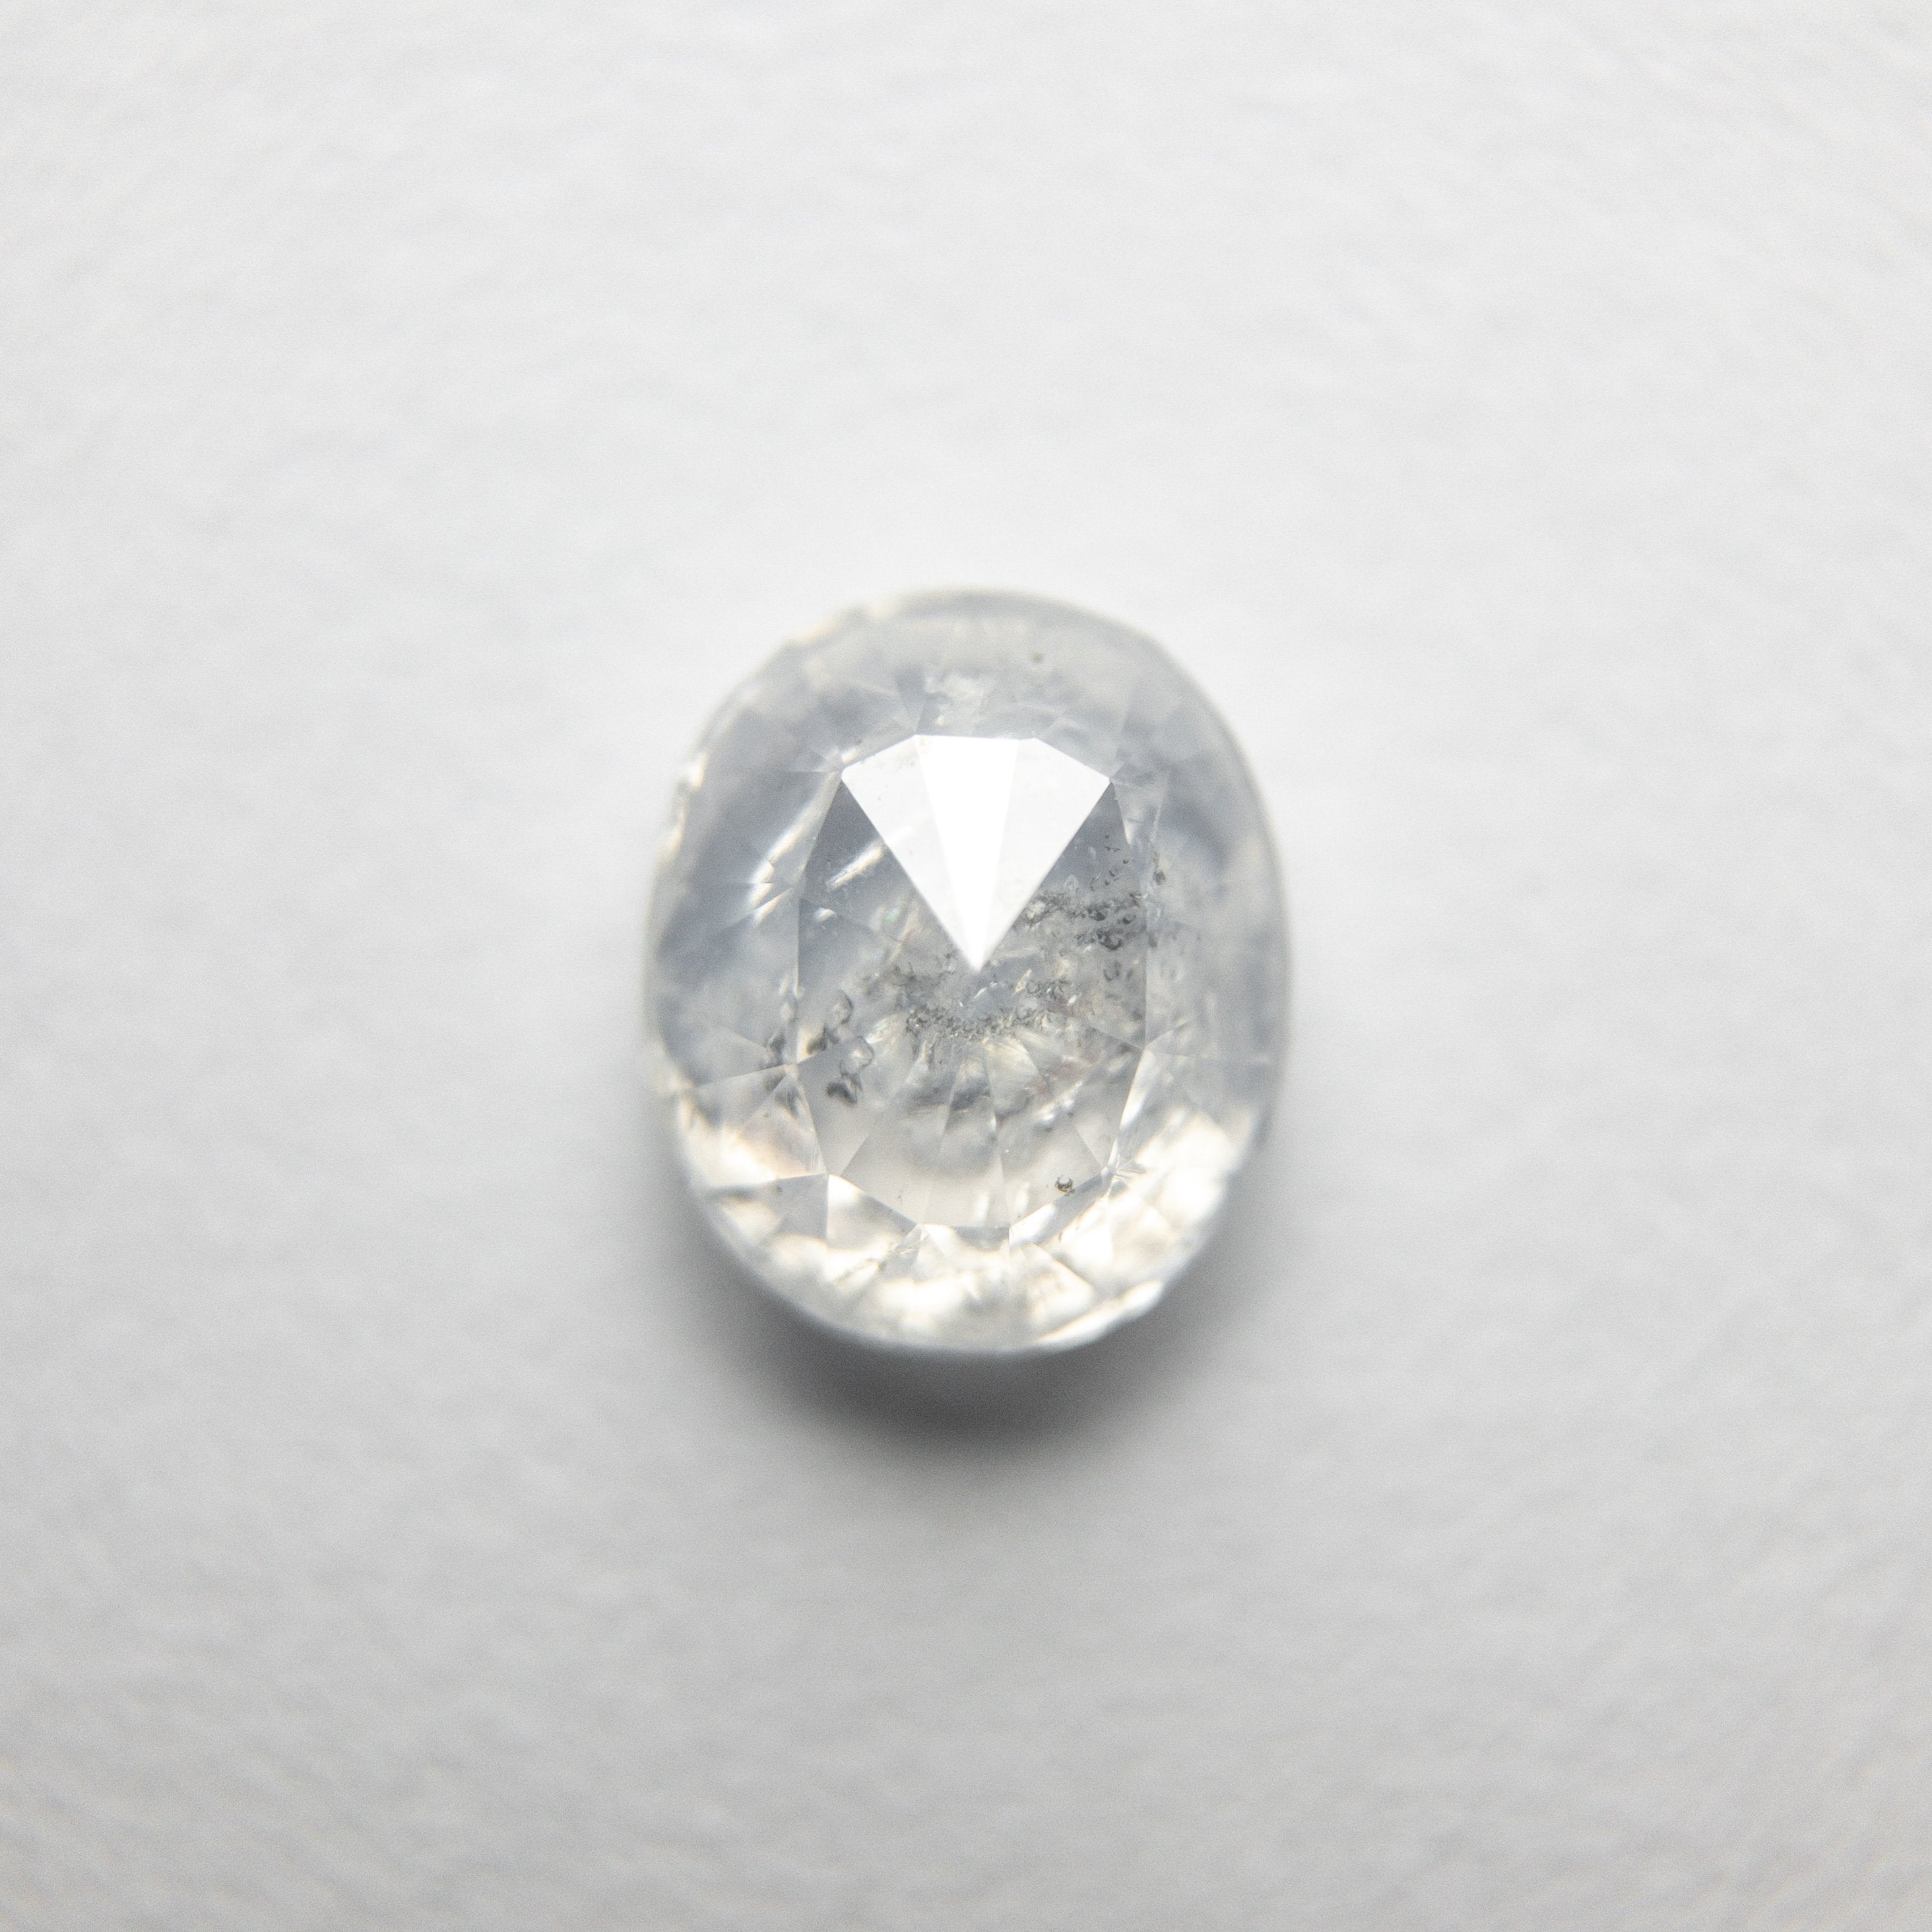 0.93ct 6.33x5.41x3.28mm Oval Double Cut 18351-17